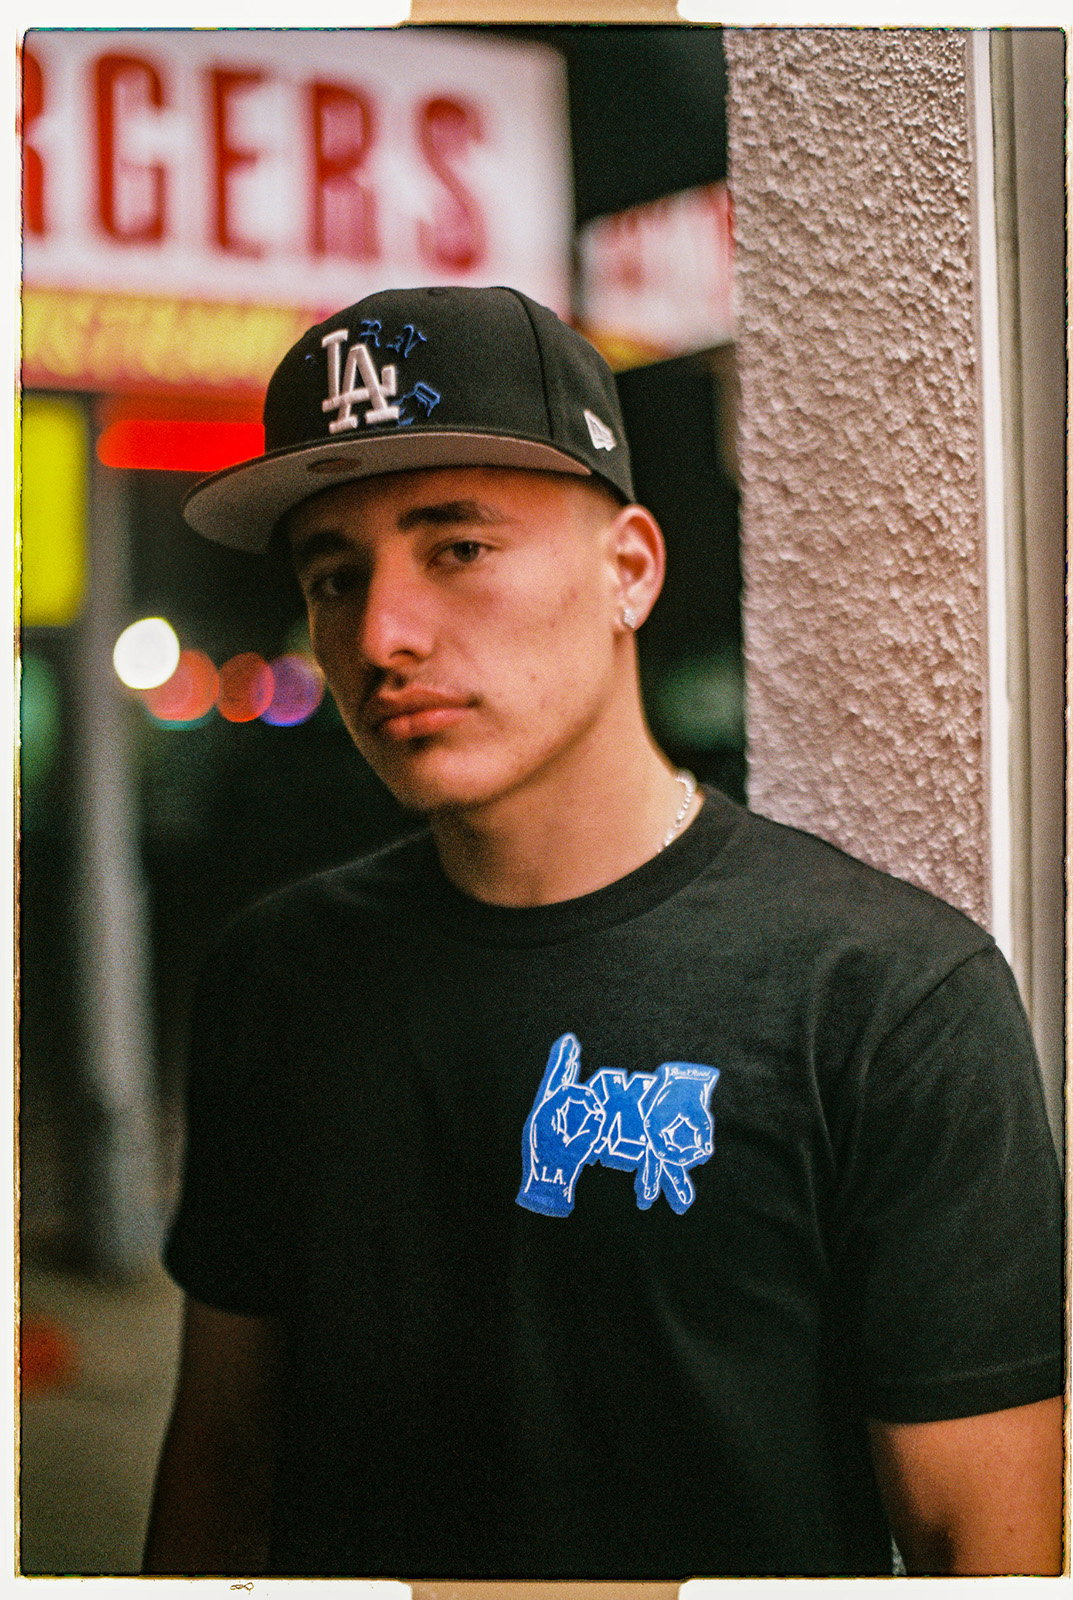 Los Angeles Dodgers on X: For Spanto. The Dodgers x Born x Raised